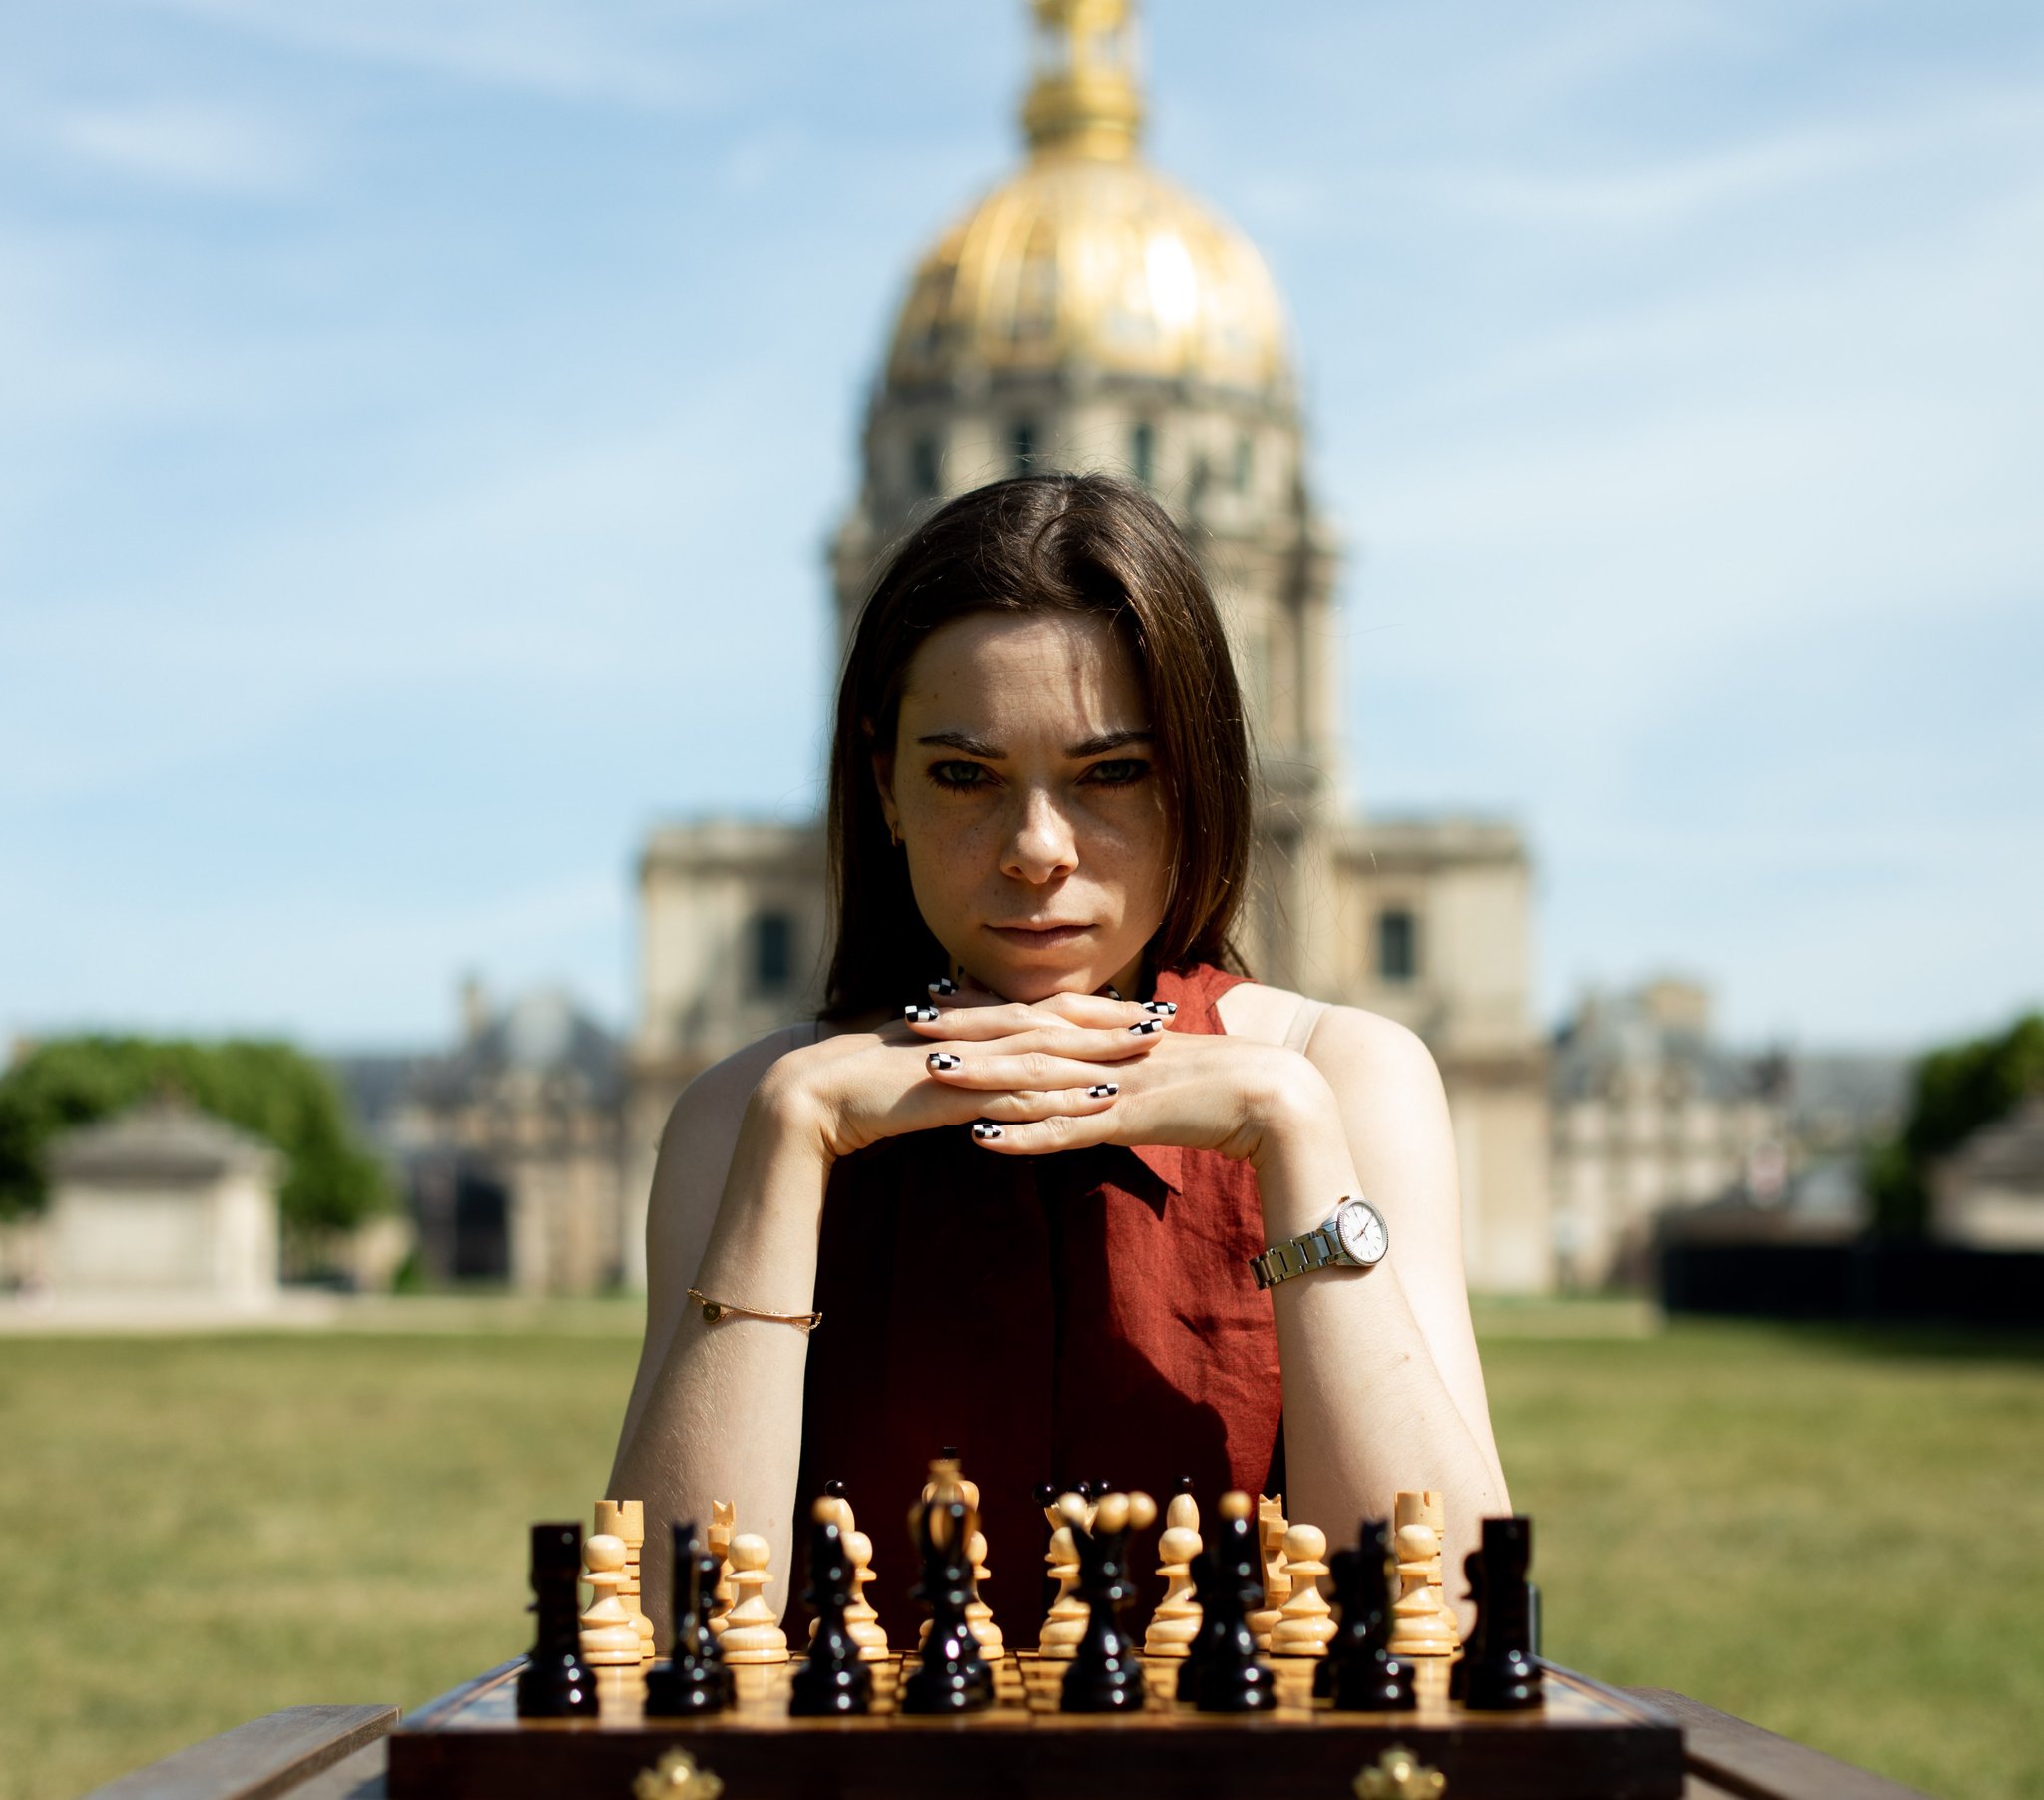 Dina Belenkaya on X: So, who is gonna win the whole thing?! https